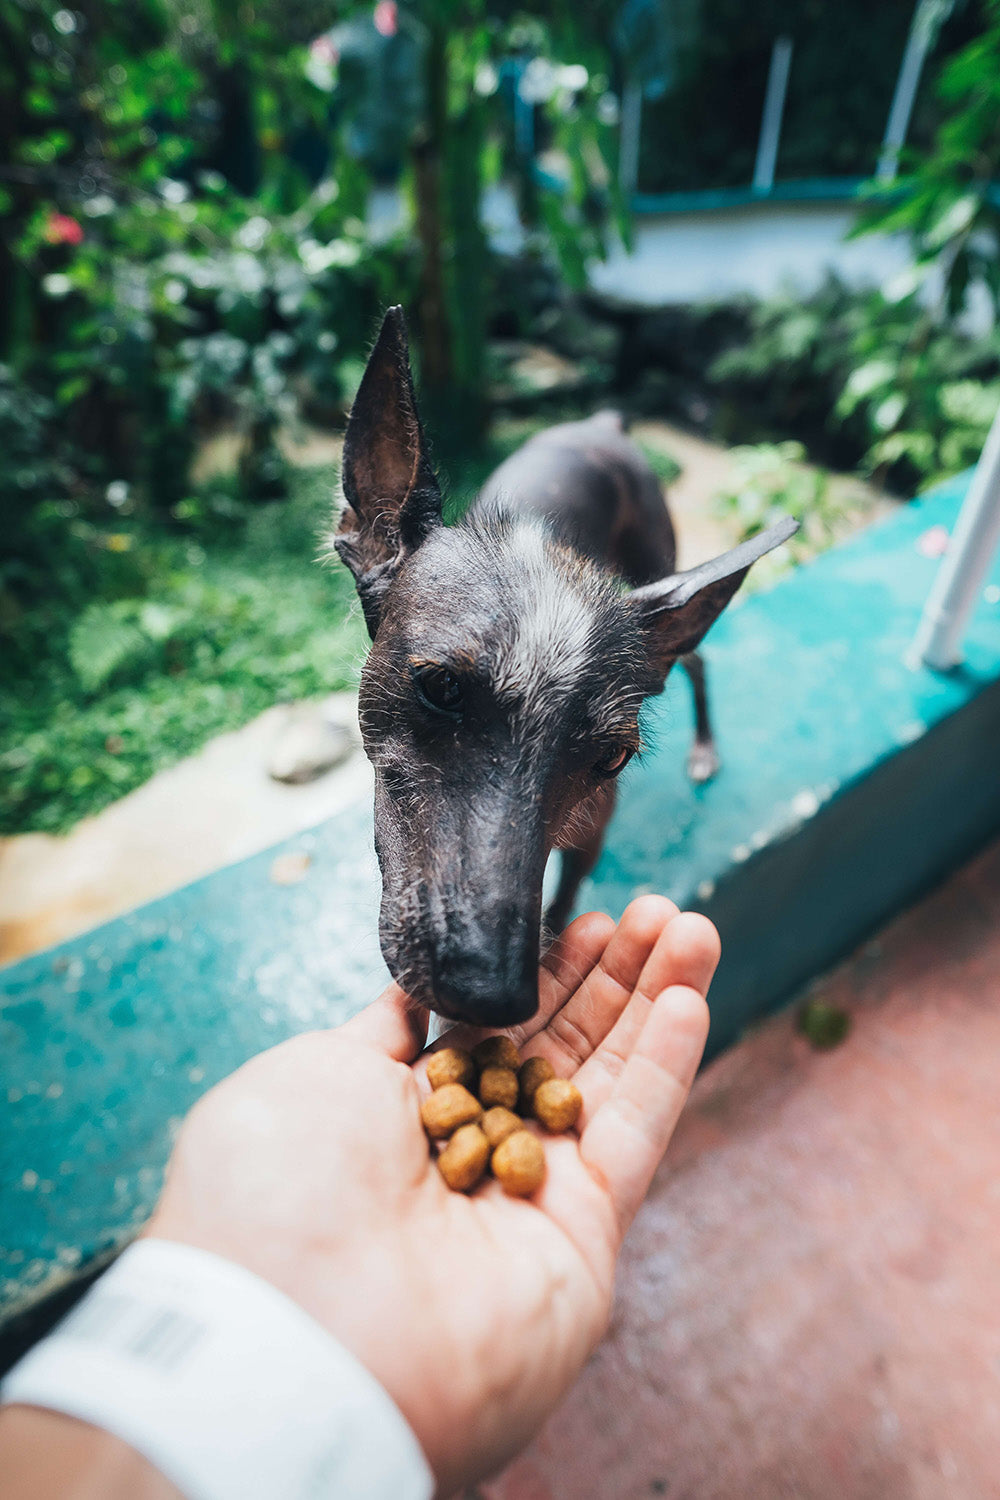 Small dog eating food from its owner's hand